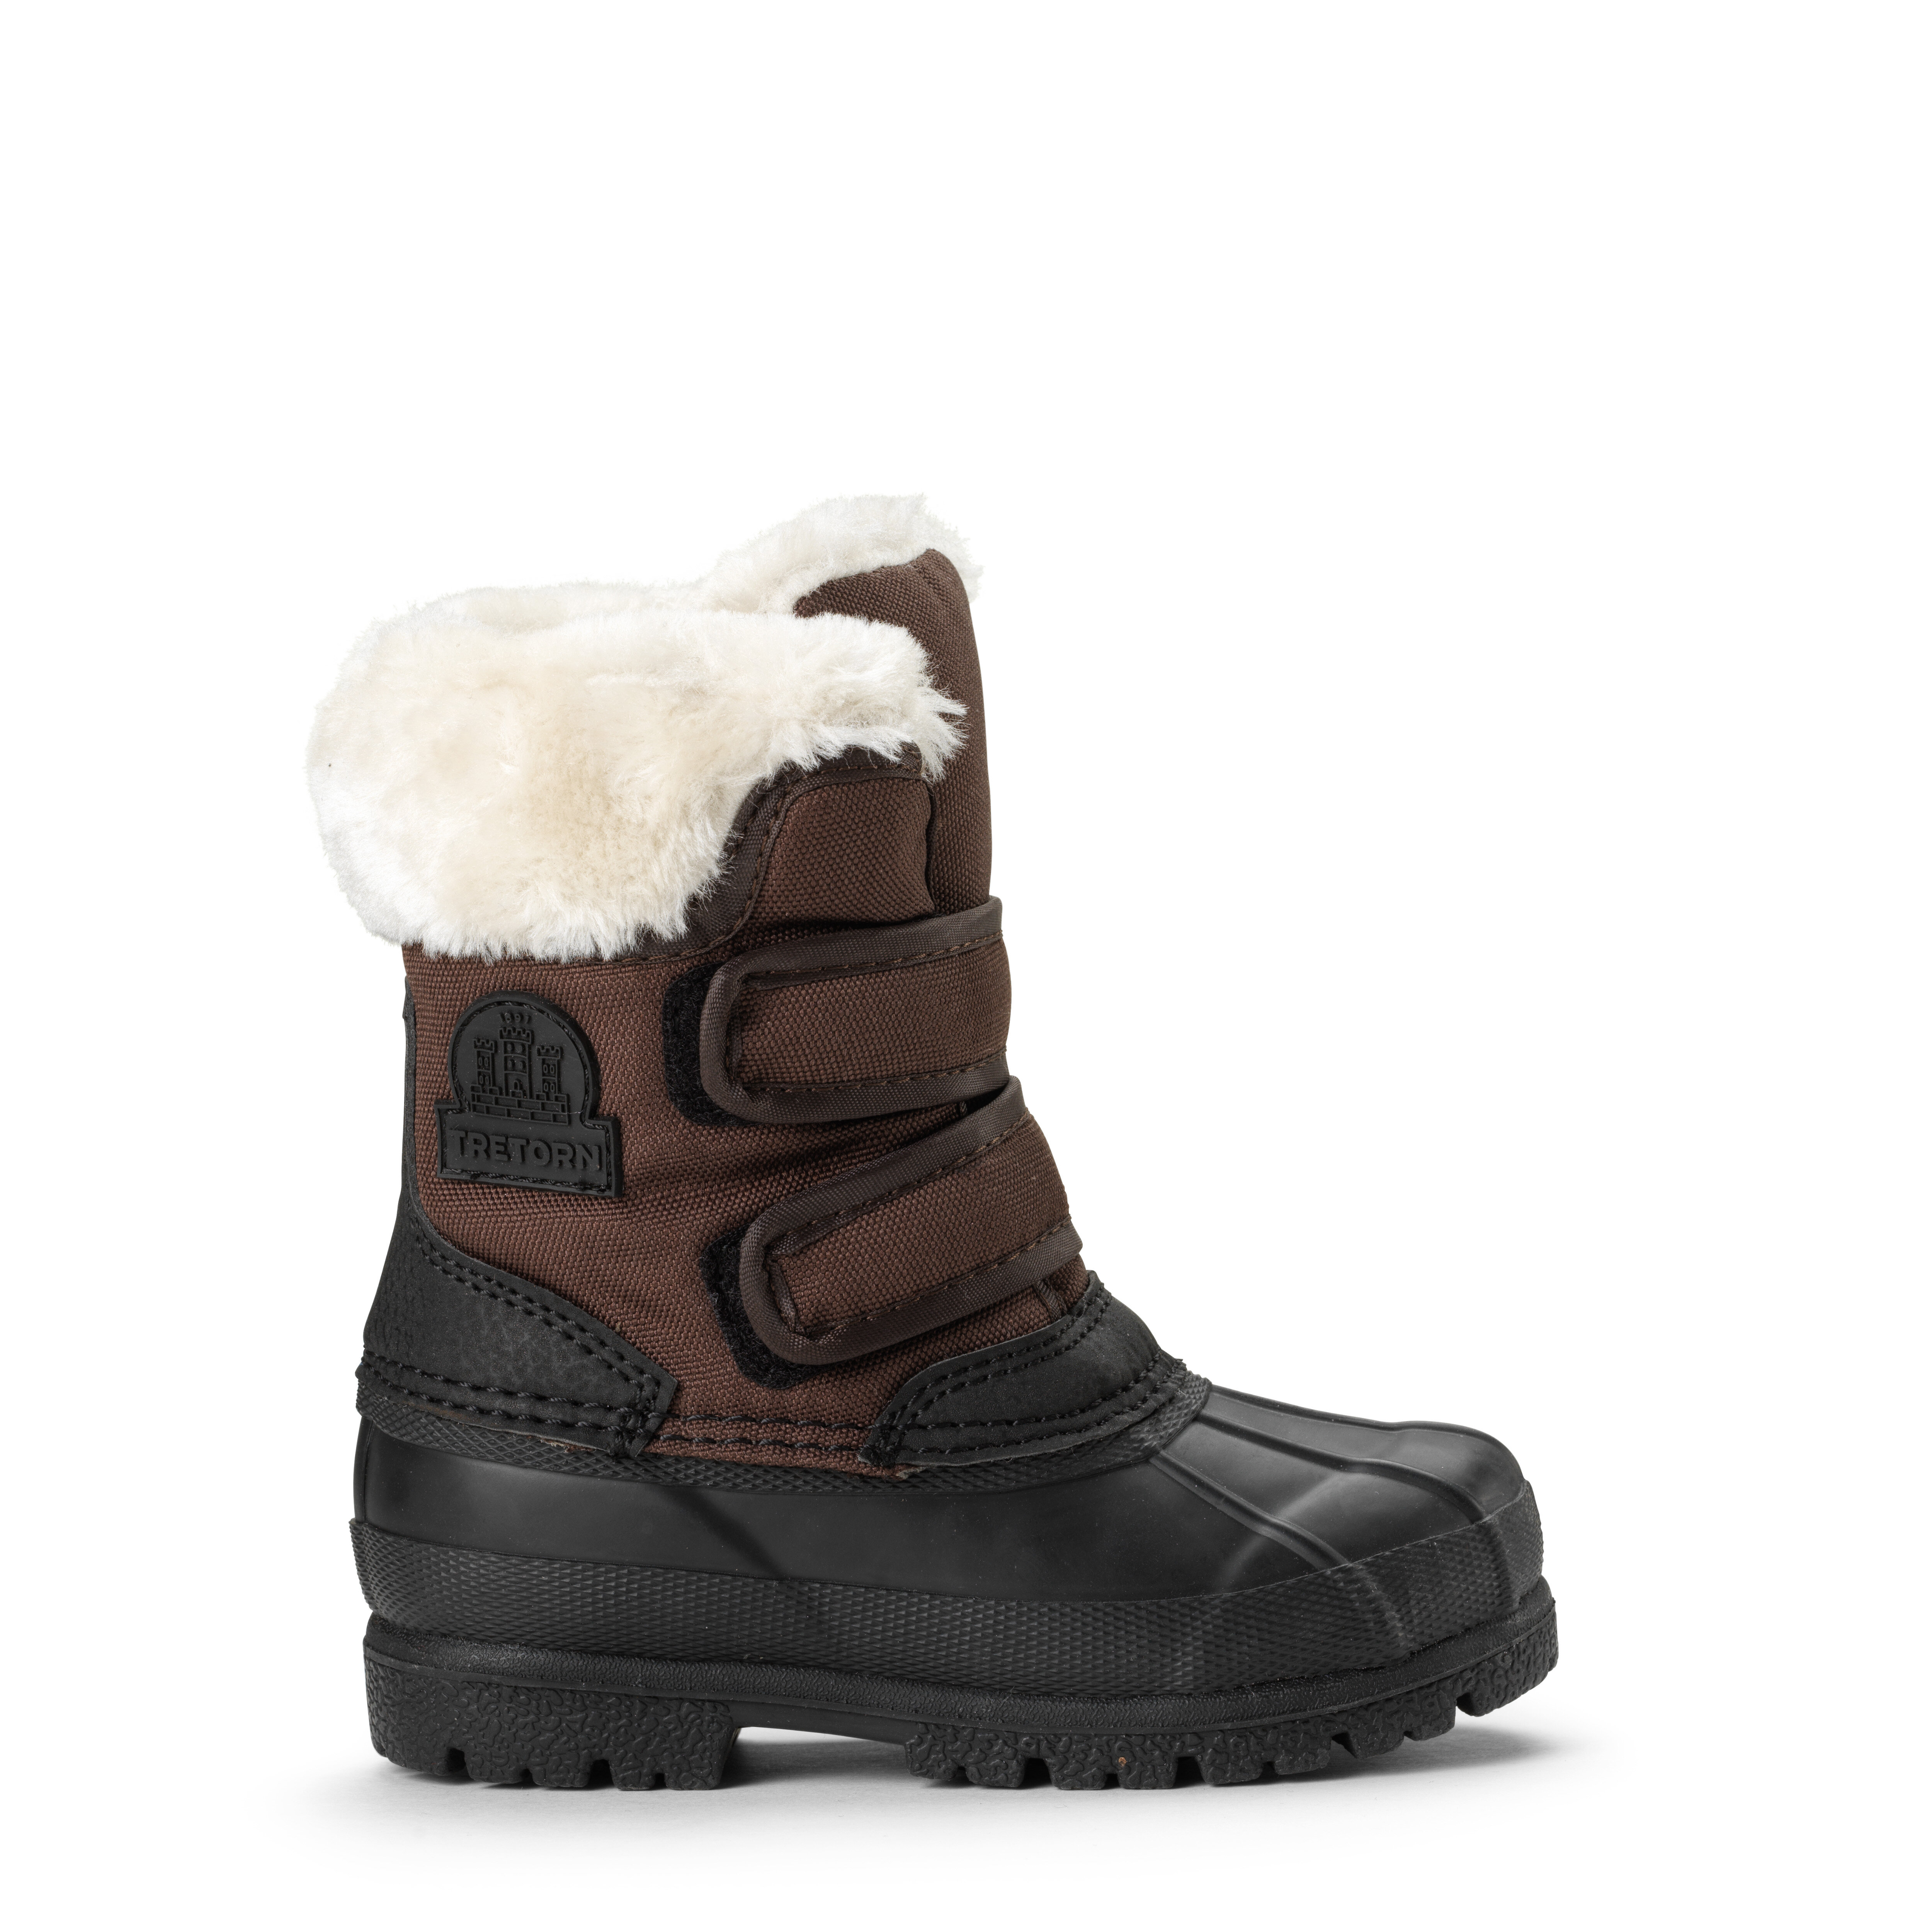 EXPEDITION BOOT